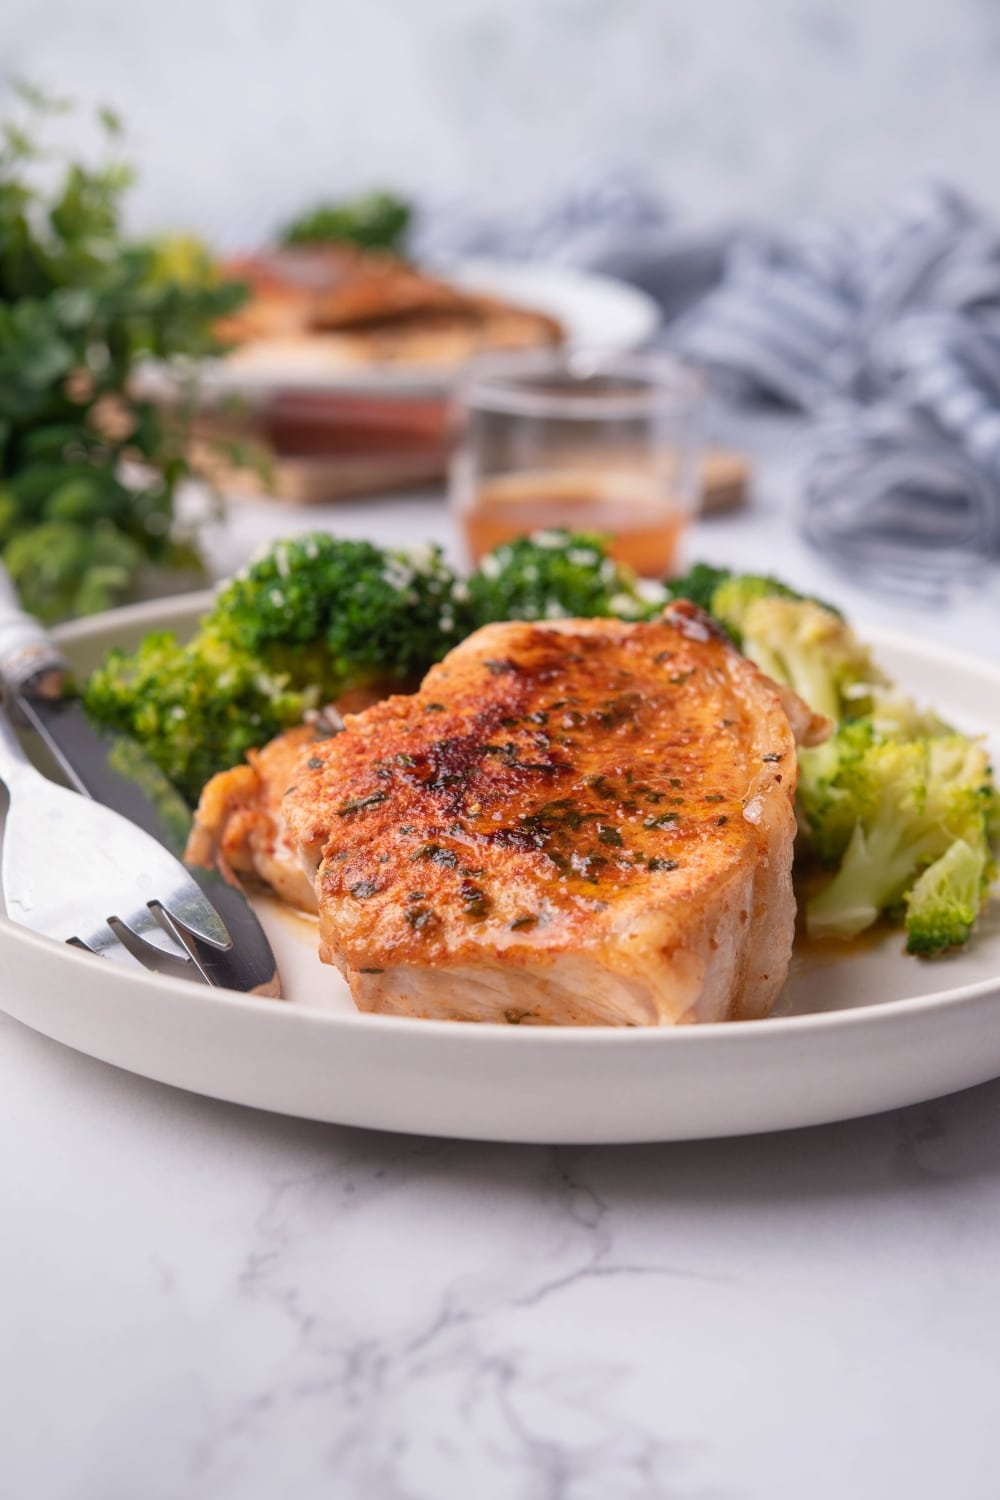 Pan seared pork chops with broccoli on a white plate. A white handled fork and knife are on the plate and another plate of pork chops and broccoli can be seen in the background next to a glass sauce pitcher of pan sauce.